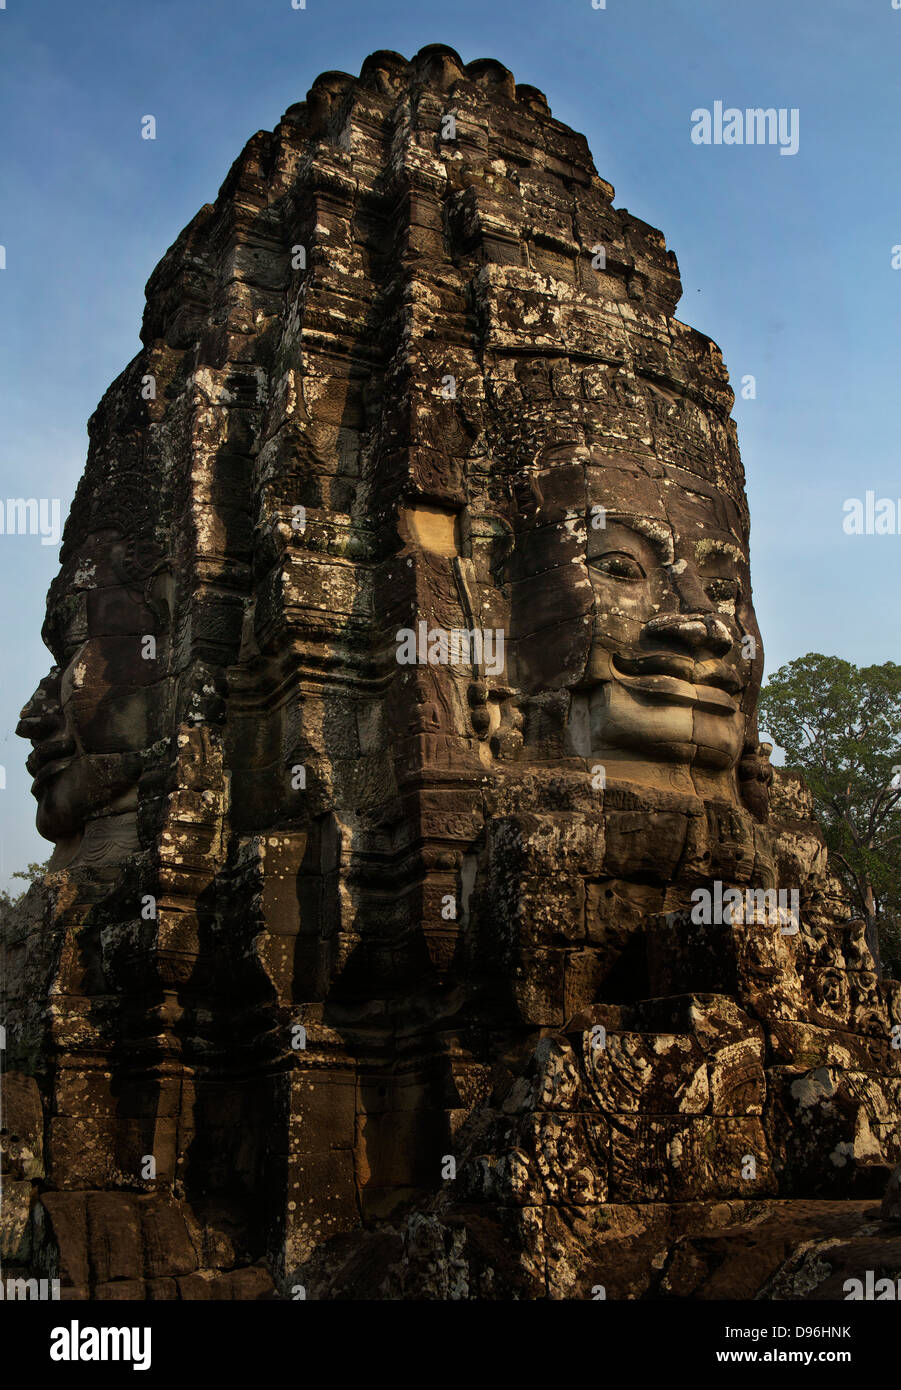 Bayon Temple, Ankor. Bayon is known for its huge stone faces of the bodhisattva Avalokiteshvara, Ankor Wat Cambodia Stock Photo